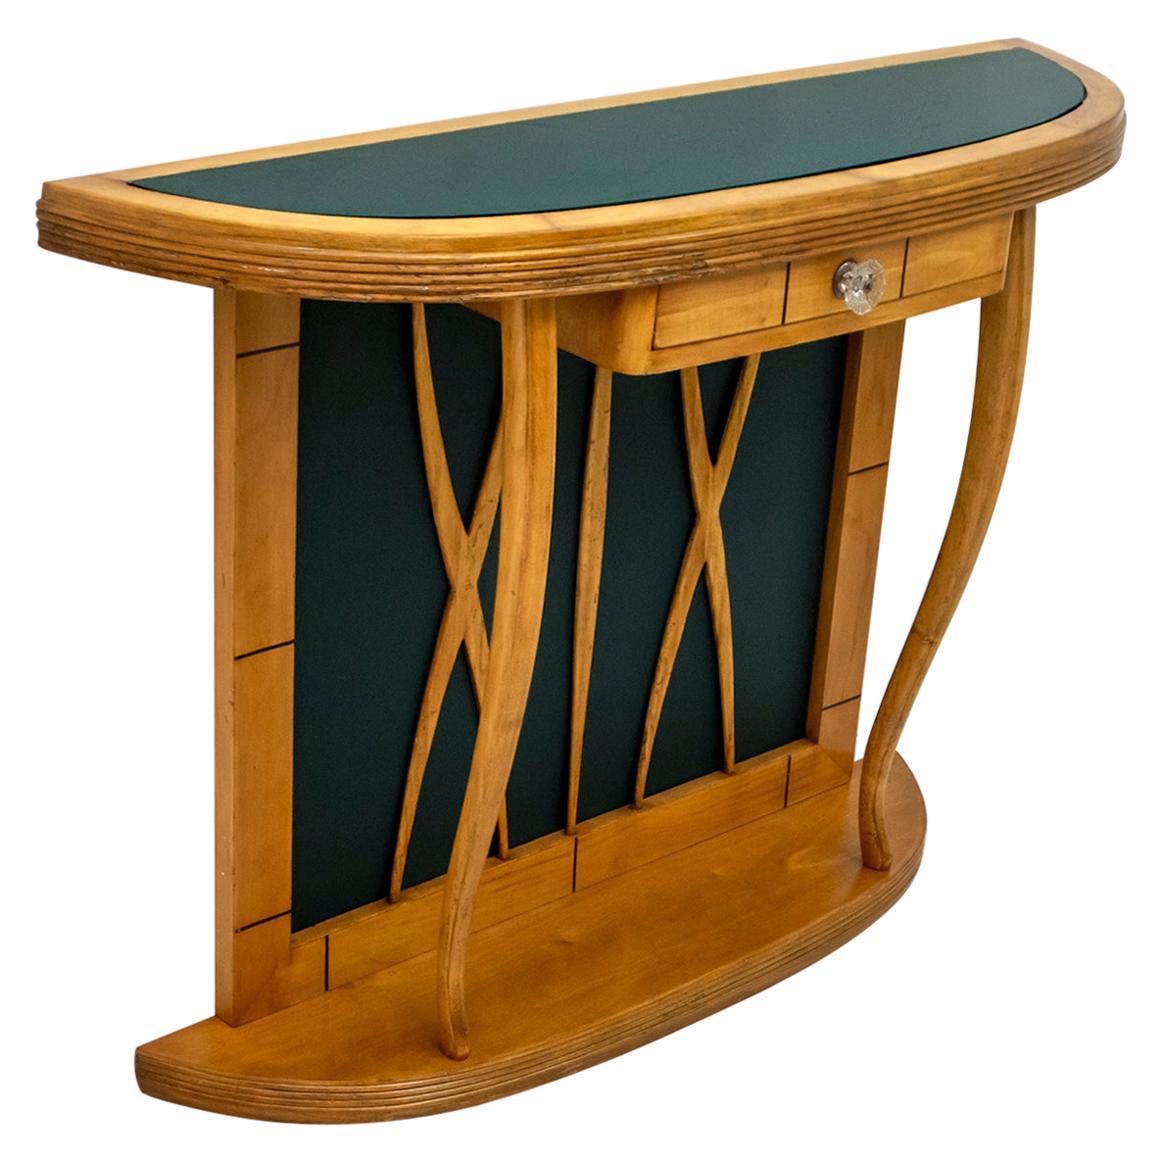 Mid-Century Modern Italian Maple and Green Glass Console, 1950